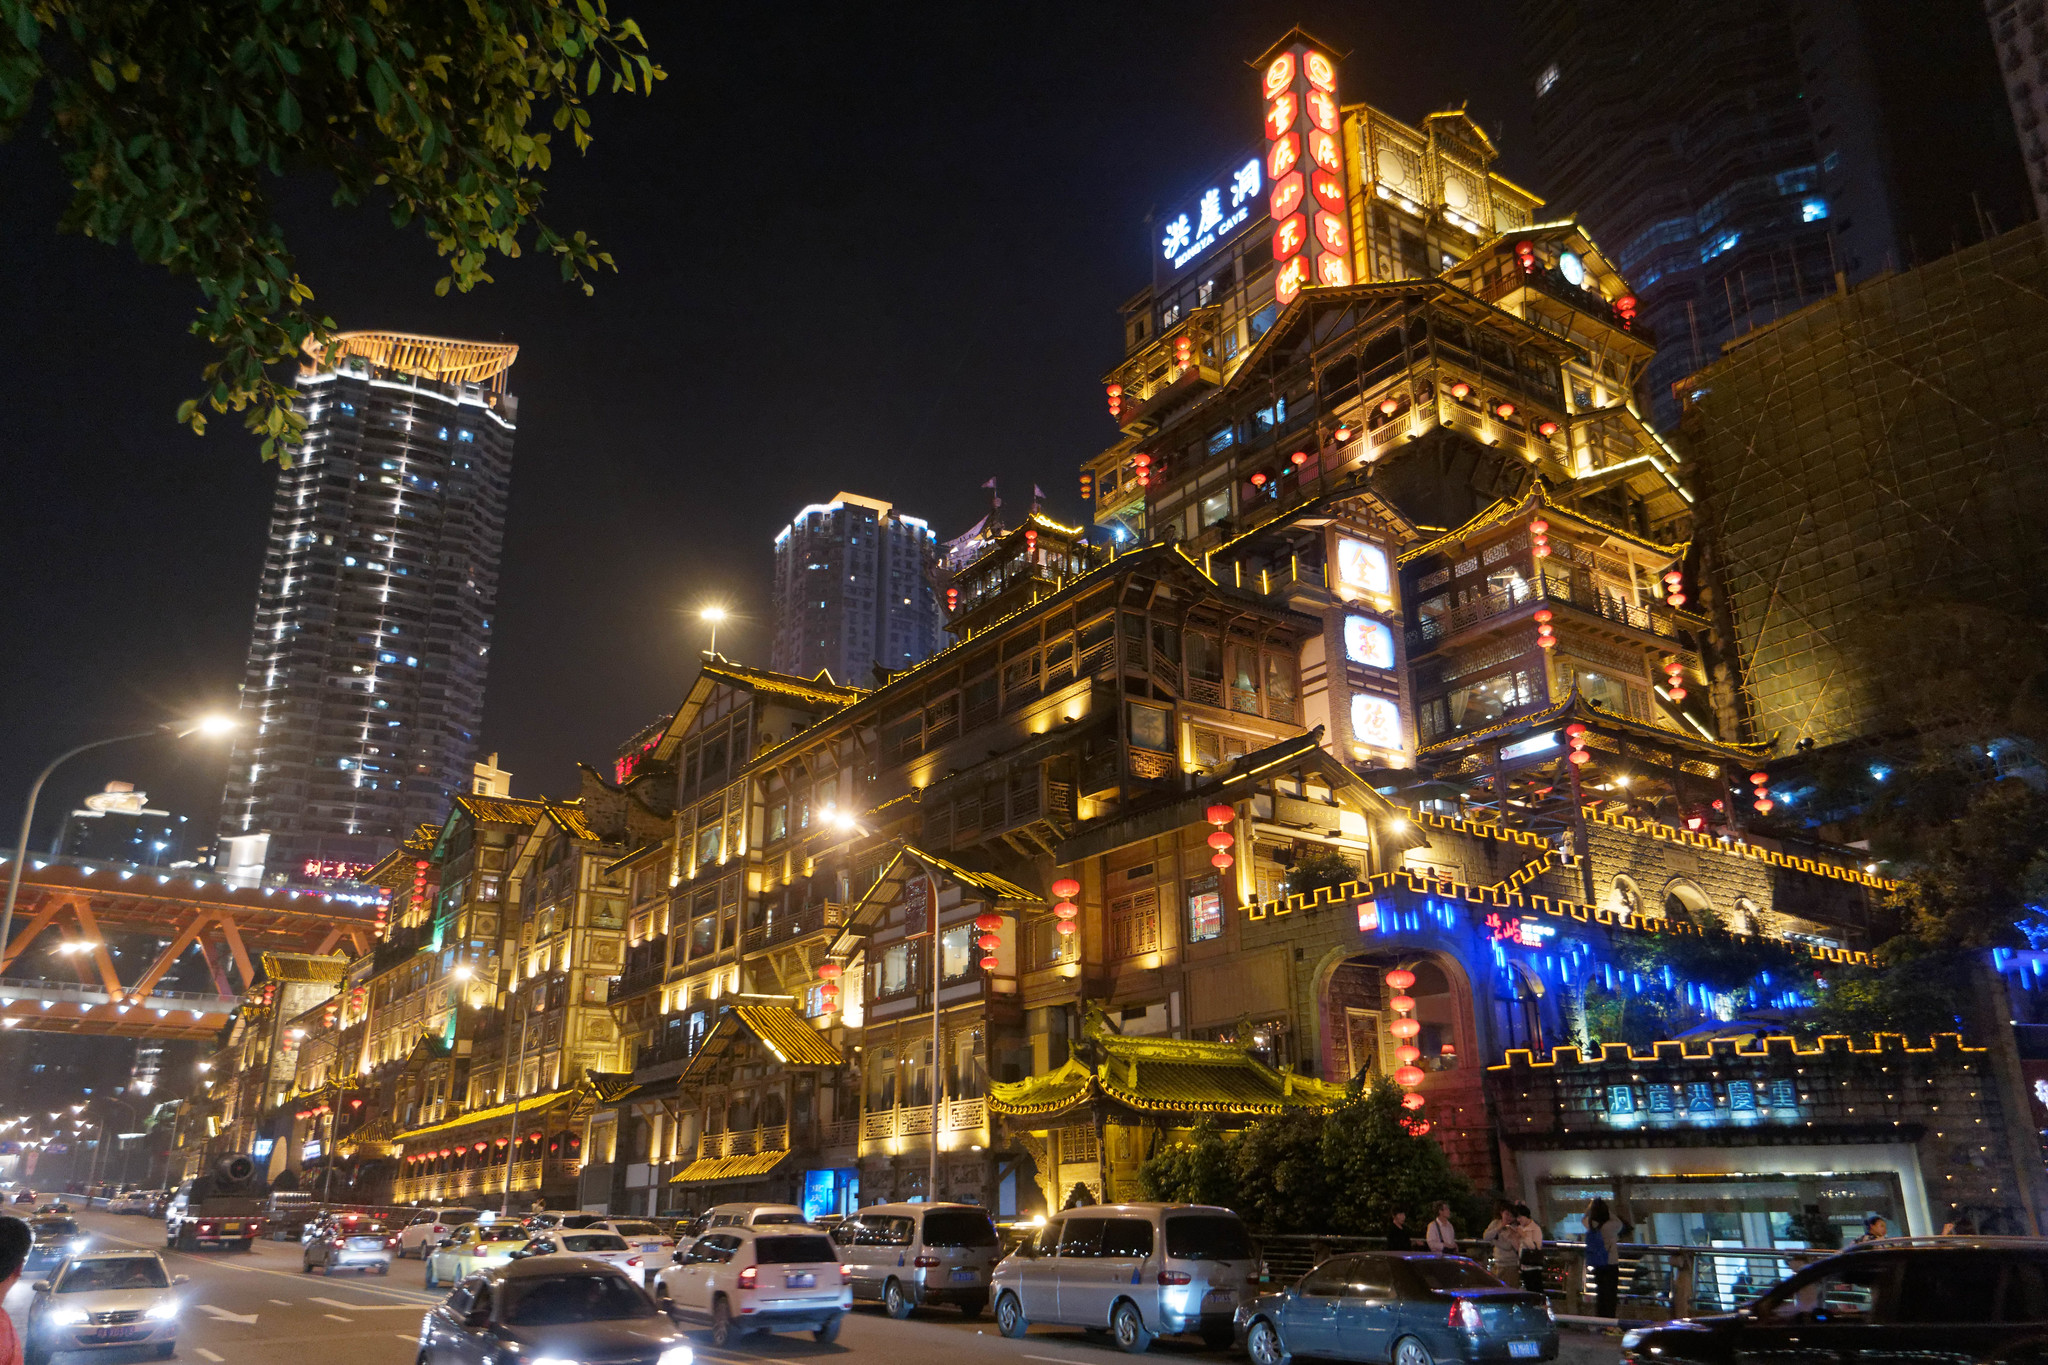 Top 5 things to do in Chongqing, China [with Suggested Tours]